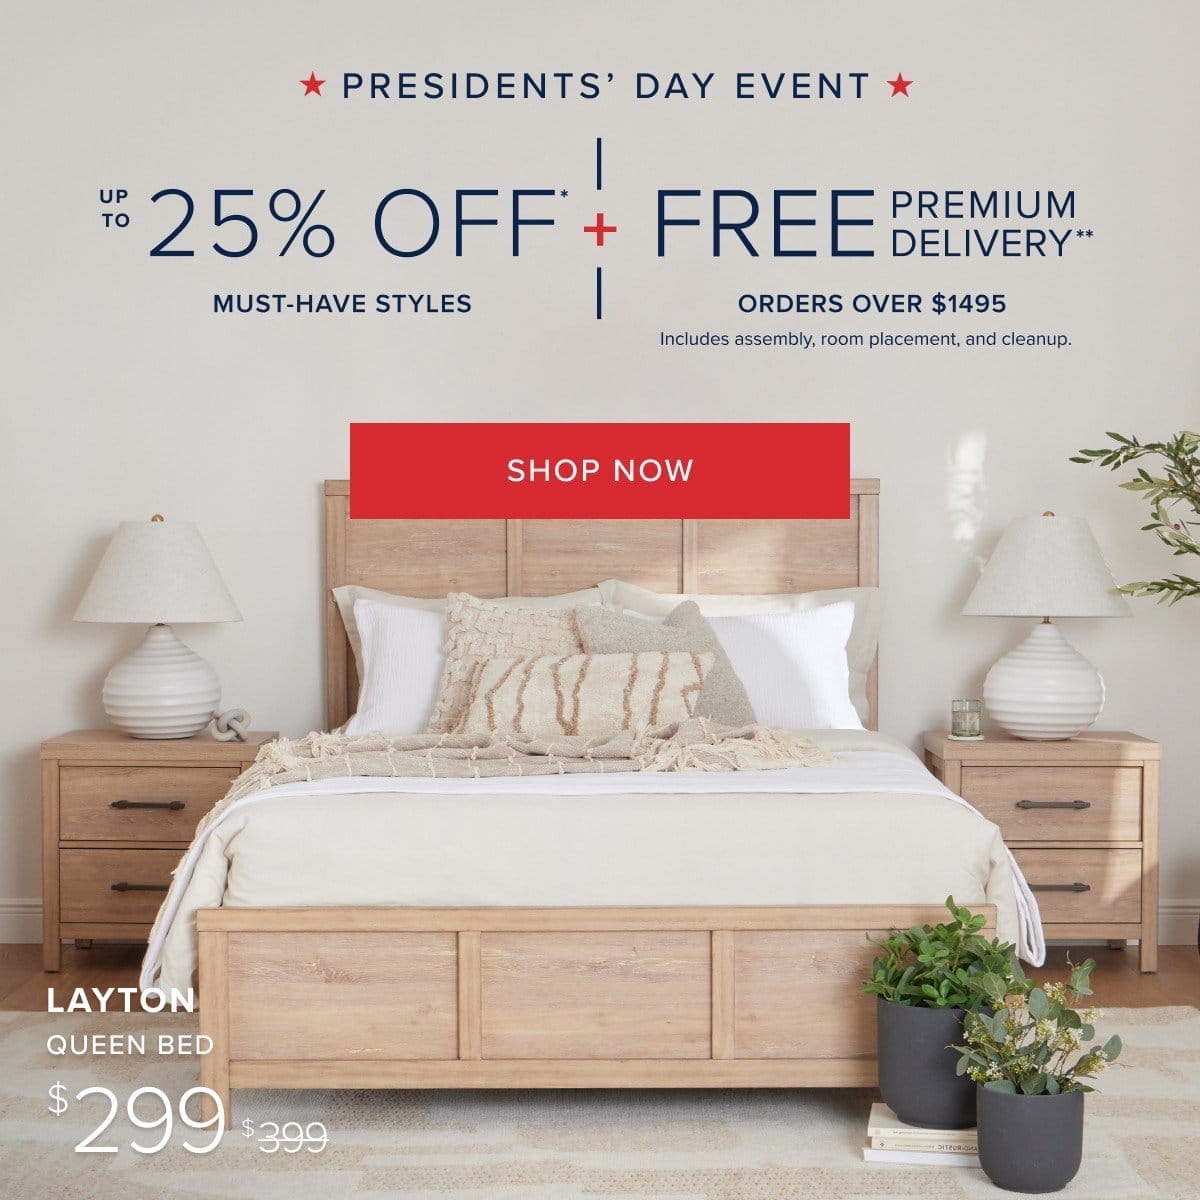 presidents day event up to 25% off must have styles and free premium delivery. shop now